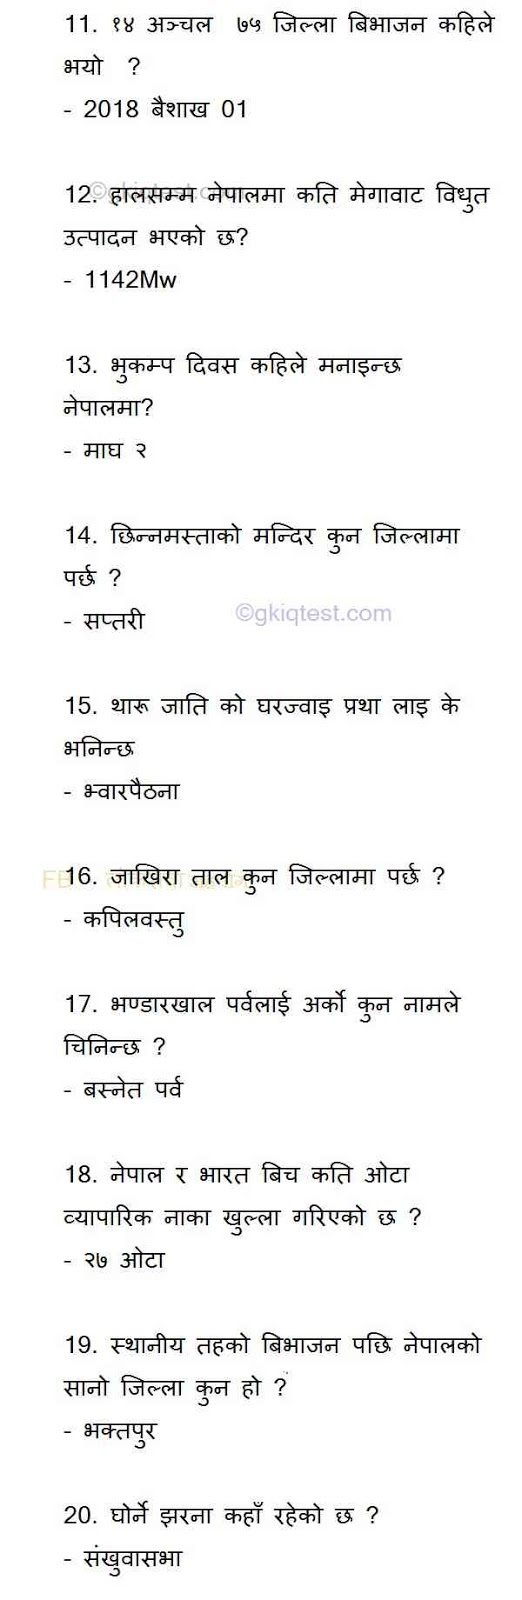 General Knowledge Quiz Questions And Answers About Nepal - KnowledgeWalls